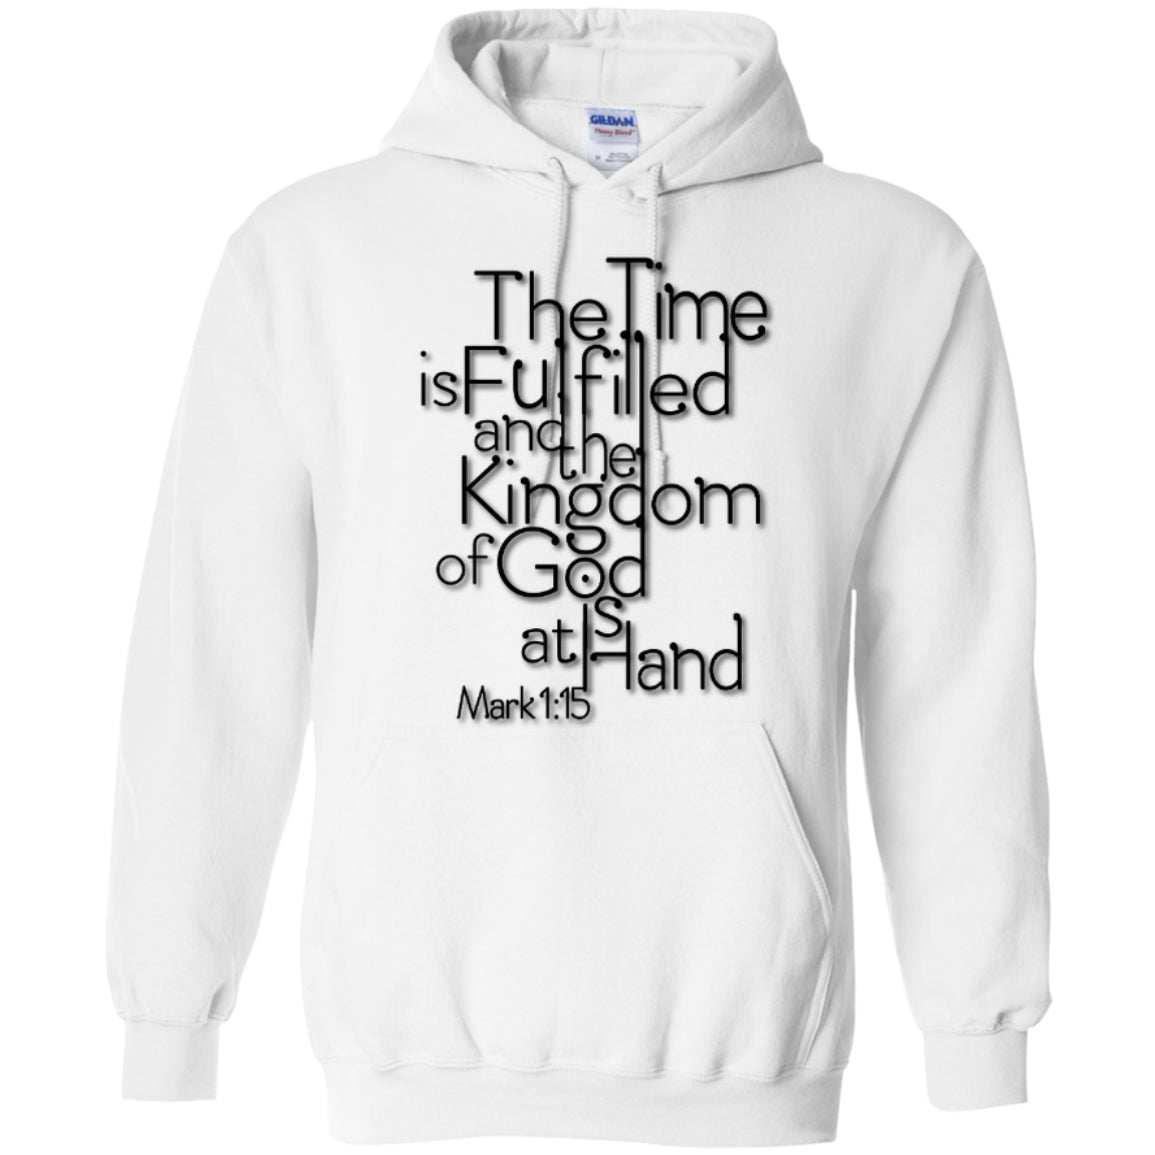 The Time Is Fulfilled - Tees And Hoodies - GoneBold.gift